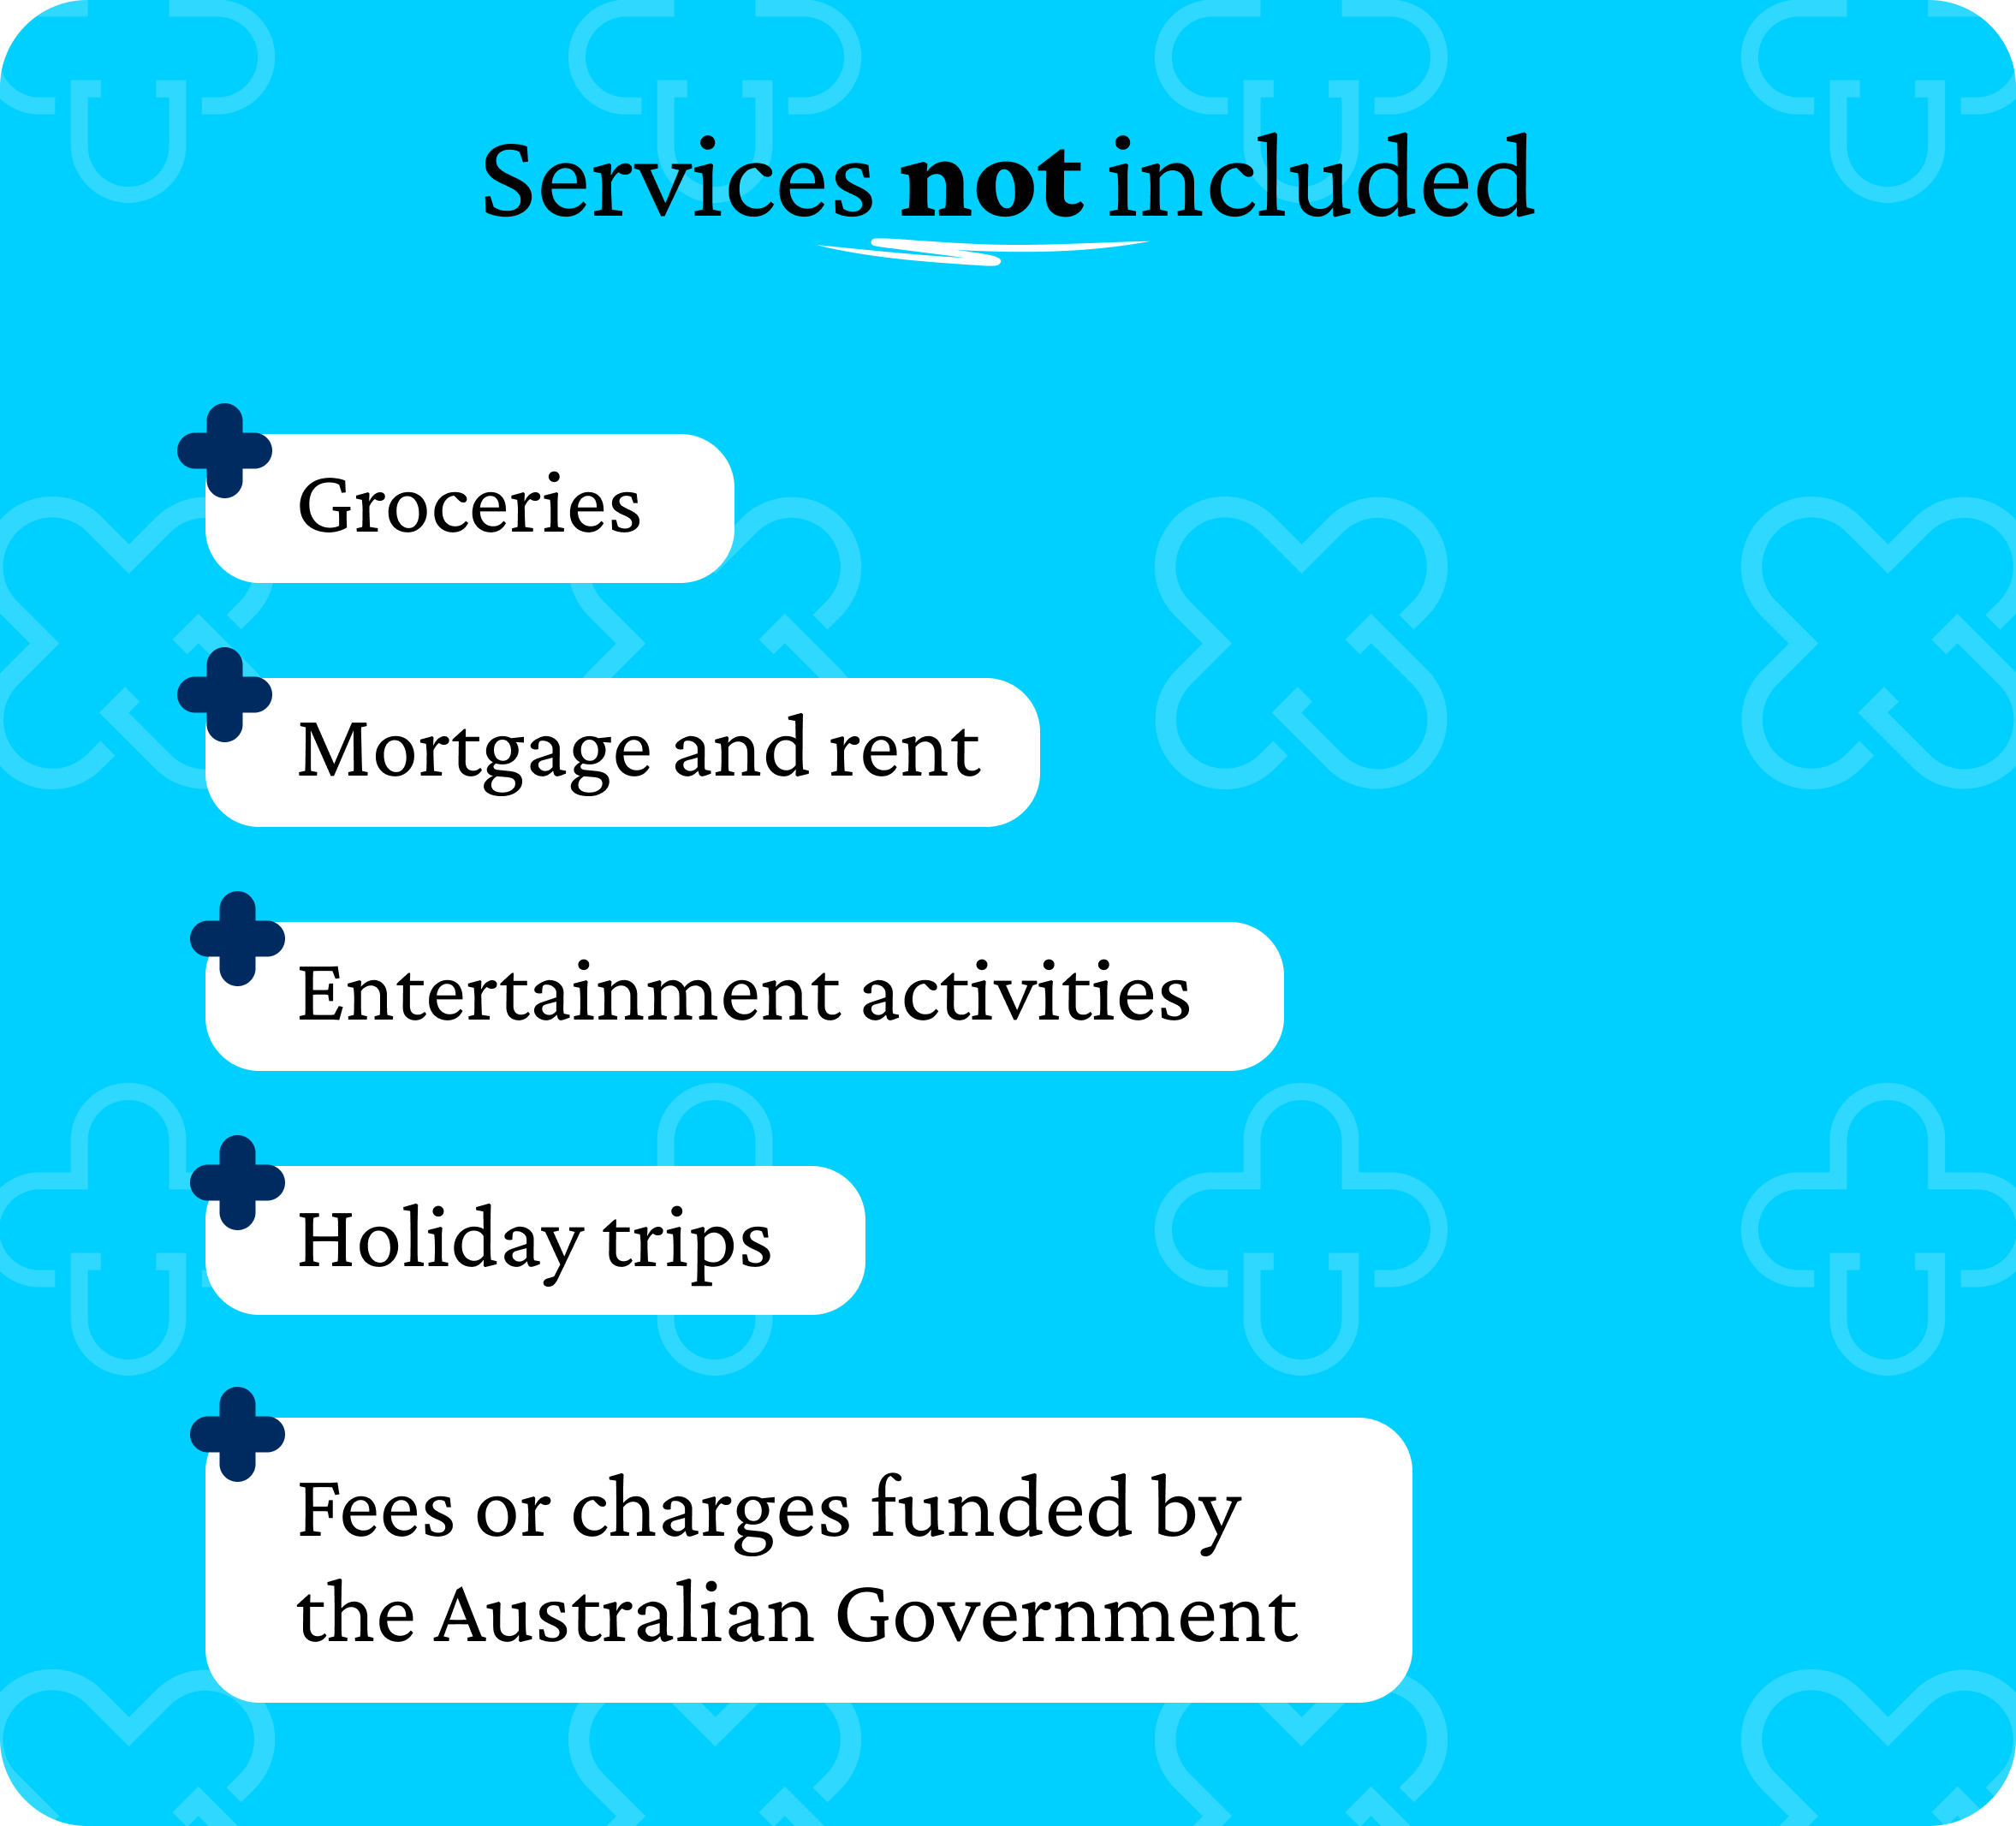 Home care package funds cannot be used for certain things, such as entertainment activities and holiday trips.